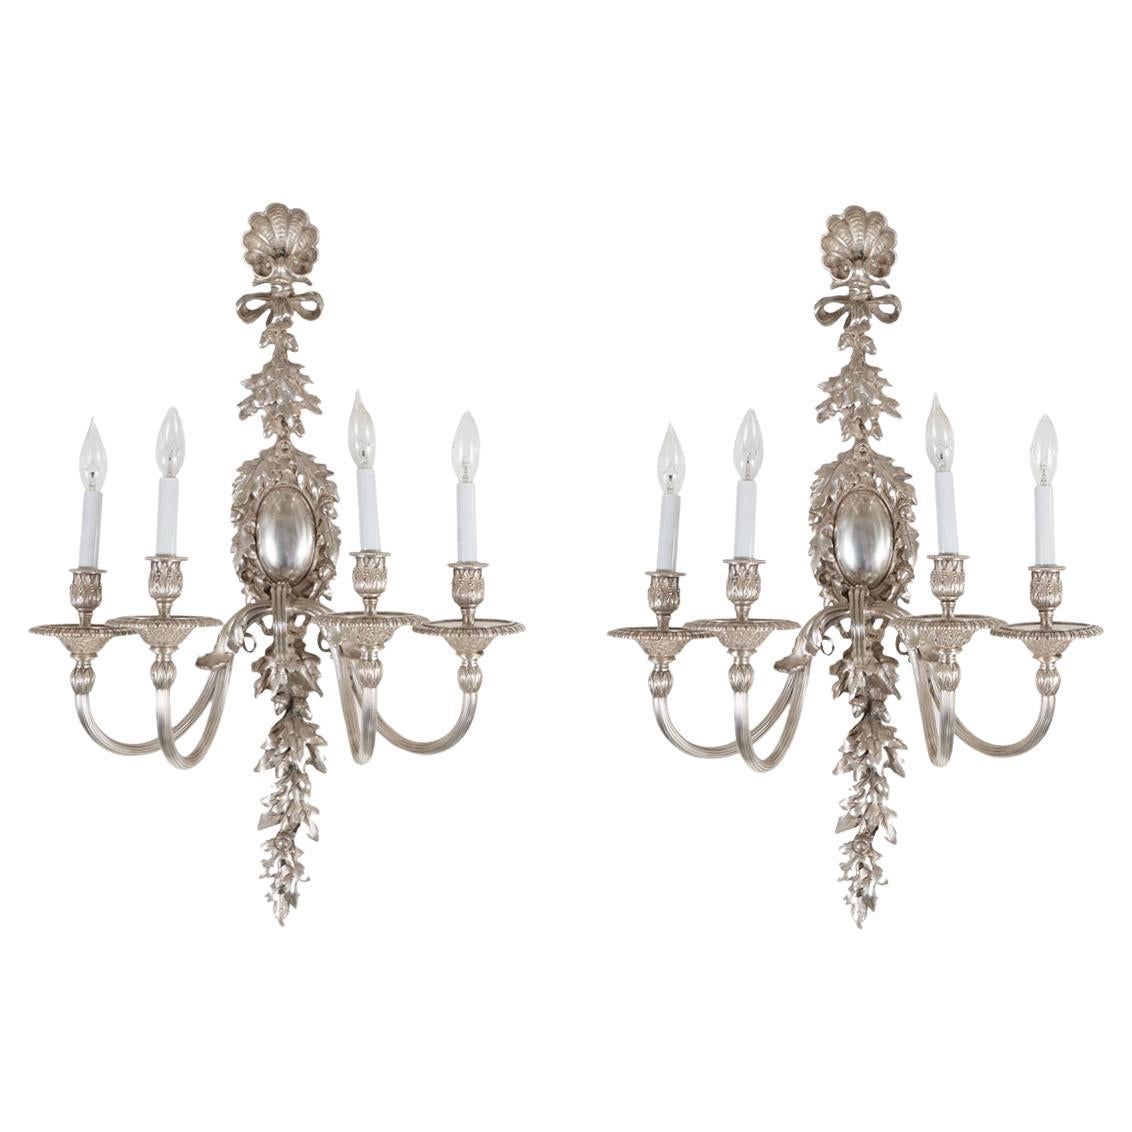 Pair of Large Silvered Bronze Candelabra Style Sconces